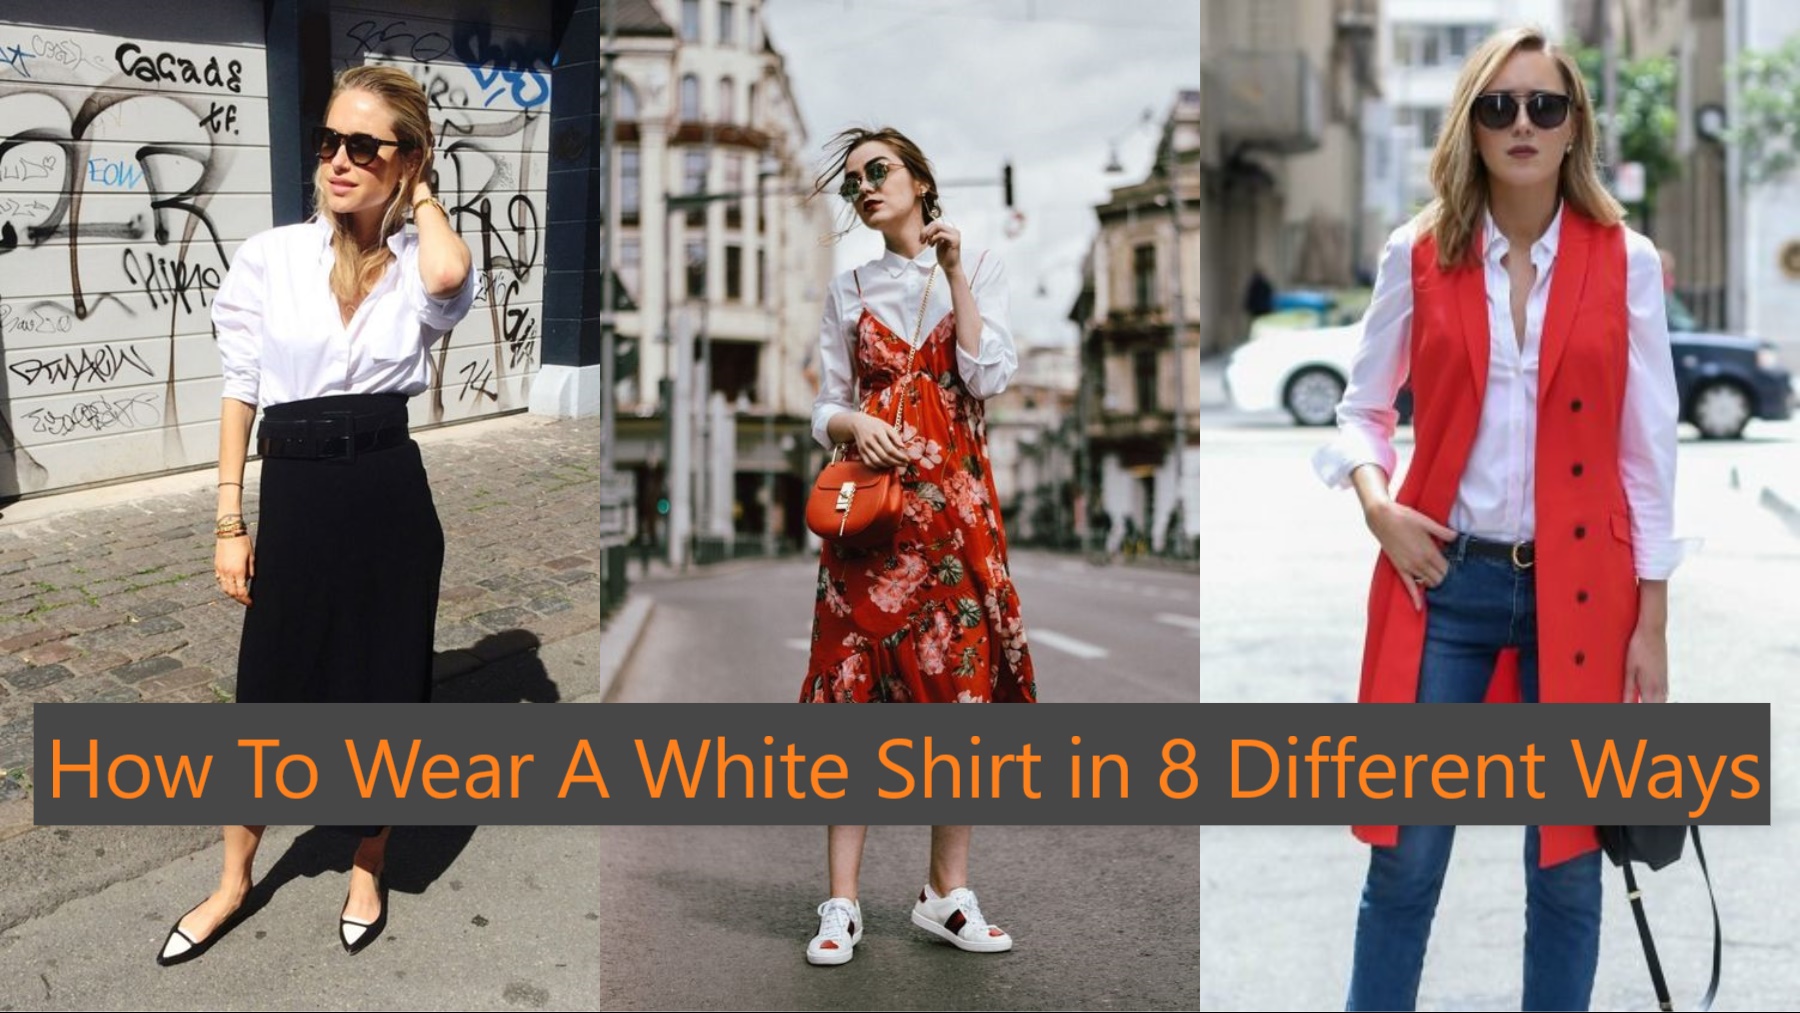 How To Wear A White Shirt in 8 Different Ways - HeSheAndBaby.com